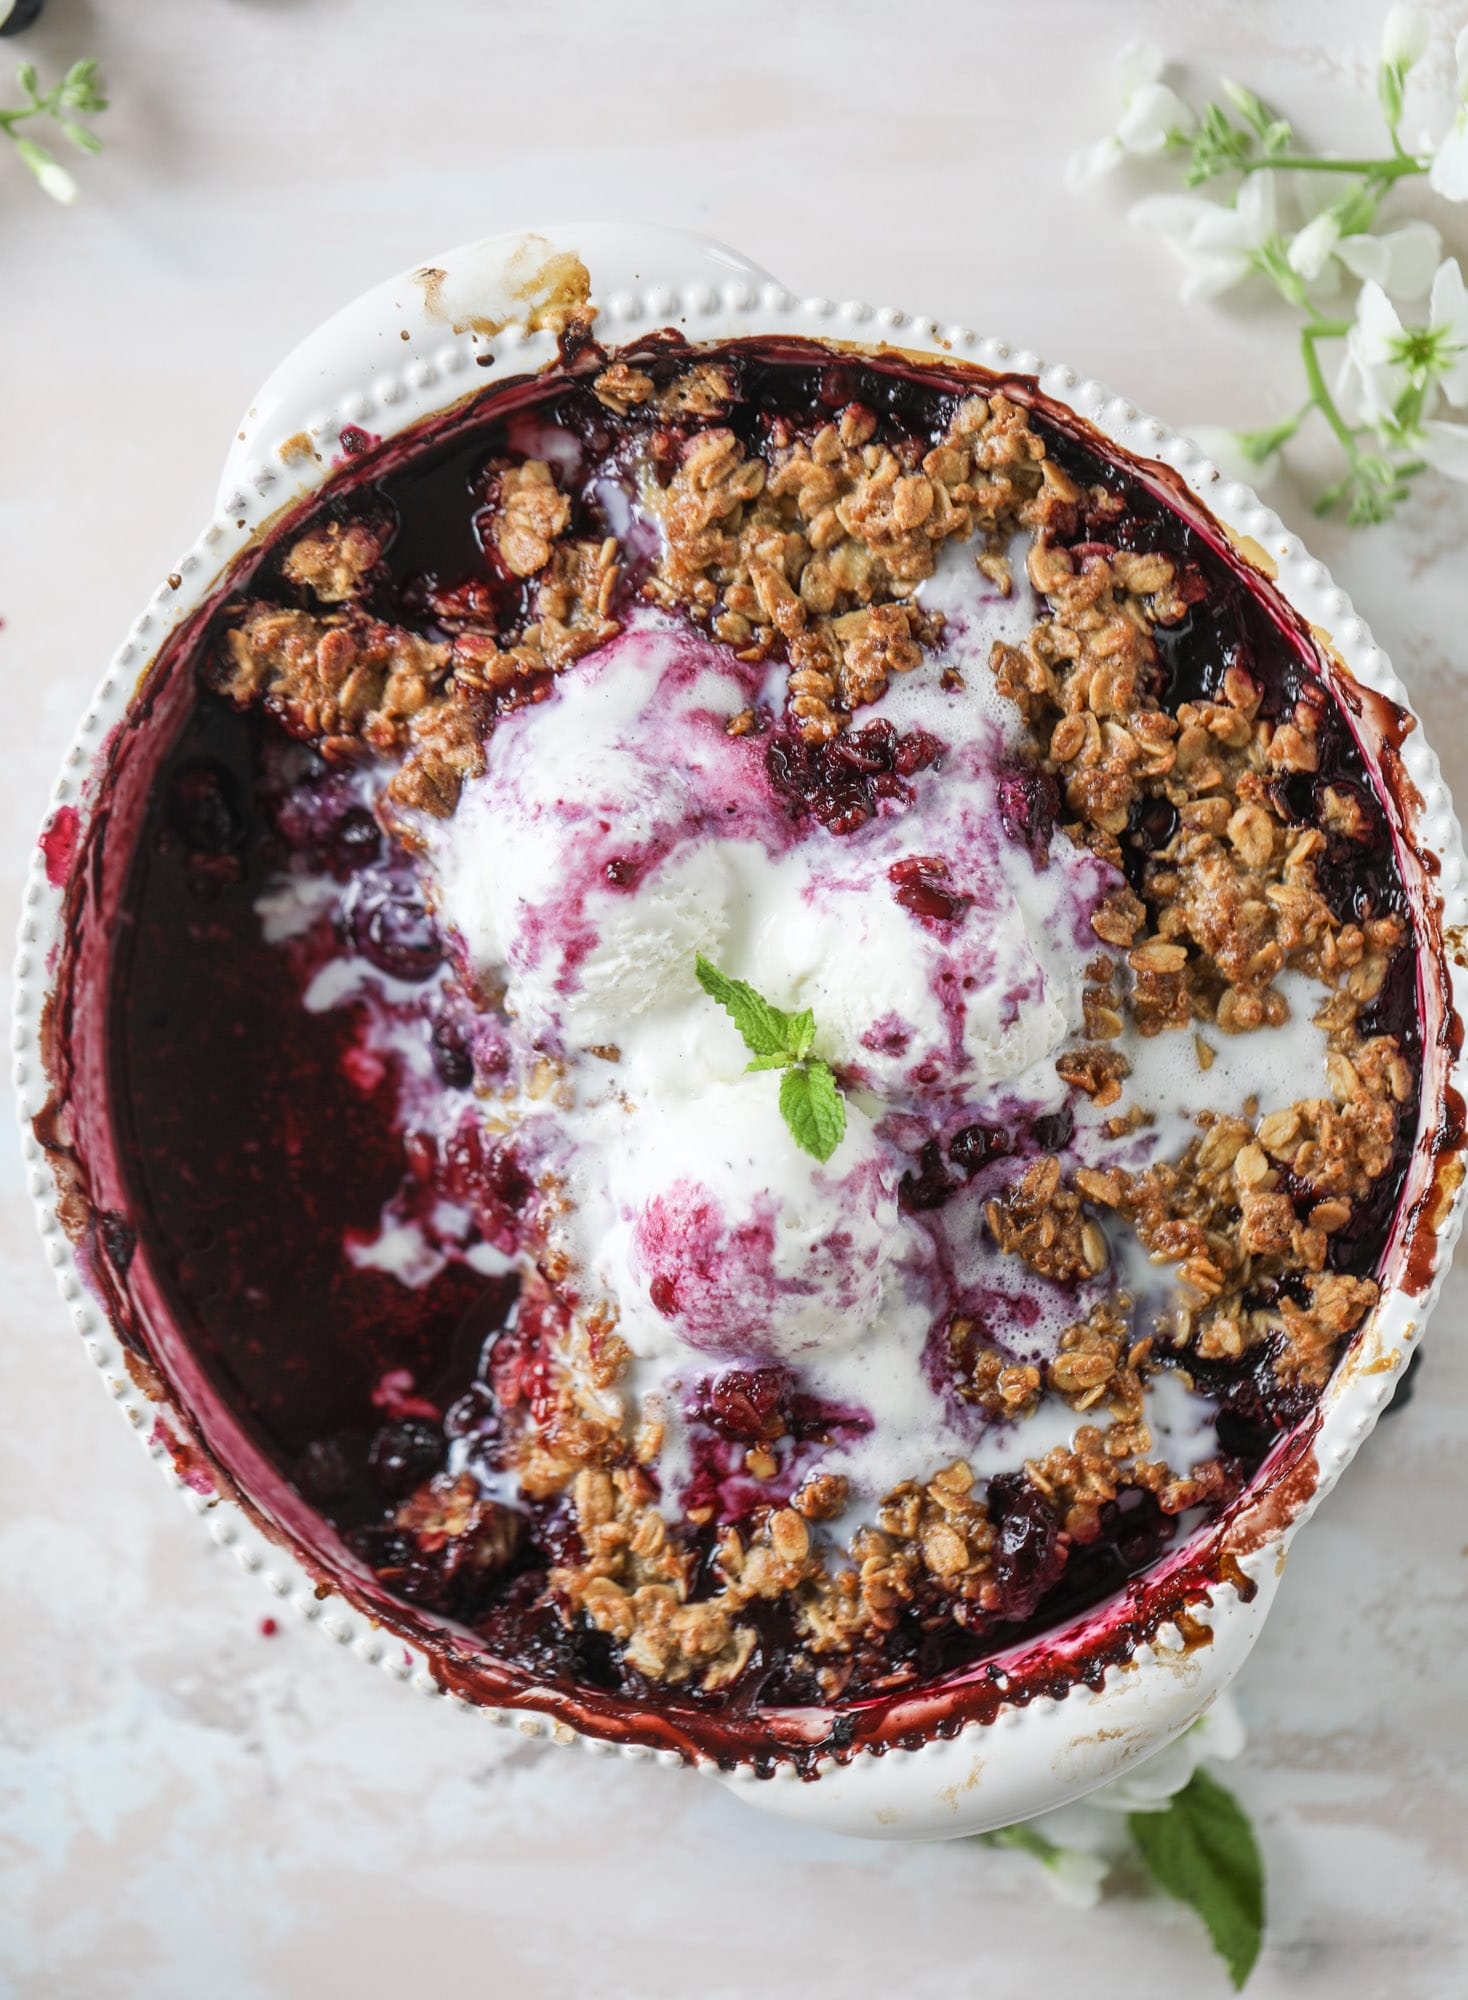 This blueberry crisp is warm and bursting with sweet and juicy fruit. It's topped with a quinoa oatmeal brown sugar topping and is the perfect dessert for summer. Served warm and topped with vanilla ice cream, it's just divine! I howsweeteats.com #blueberry #crisp #quinoa #oats #dessert #fruit 